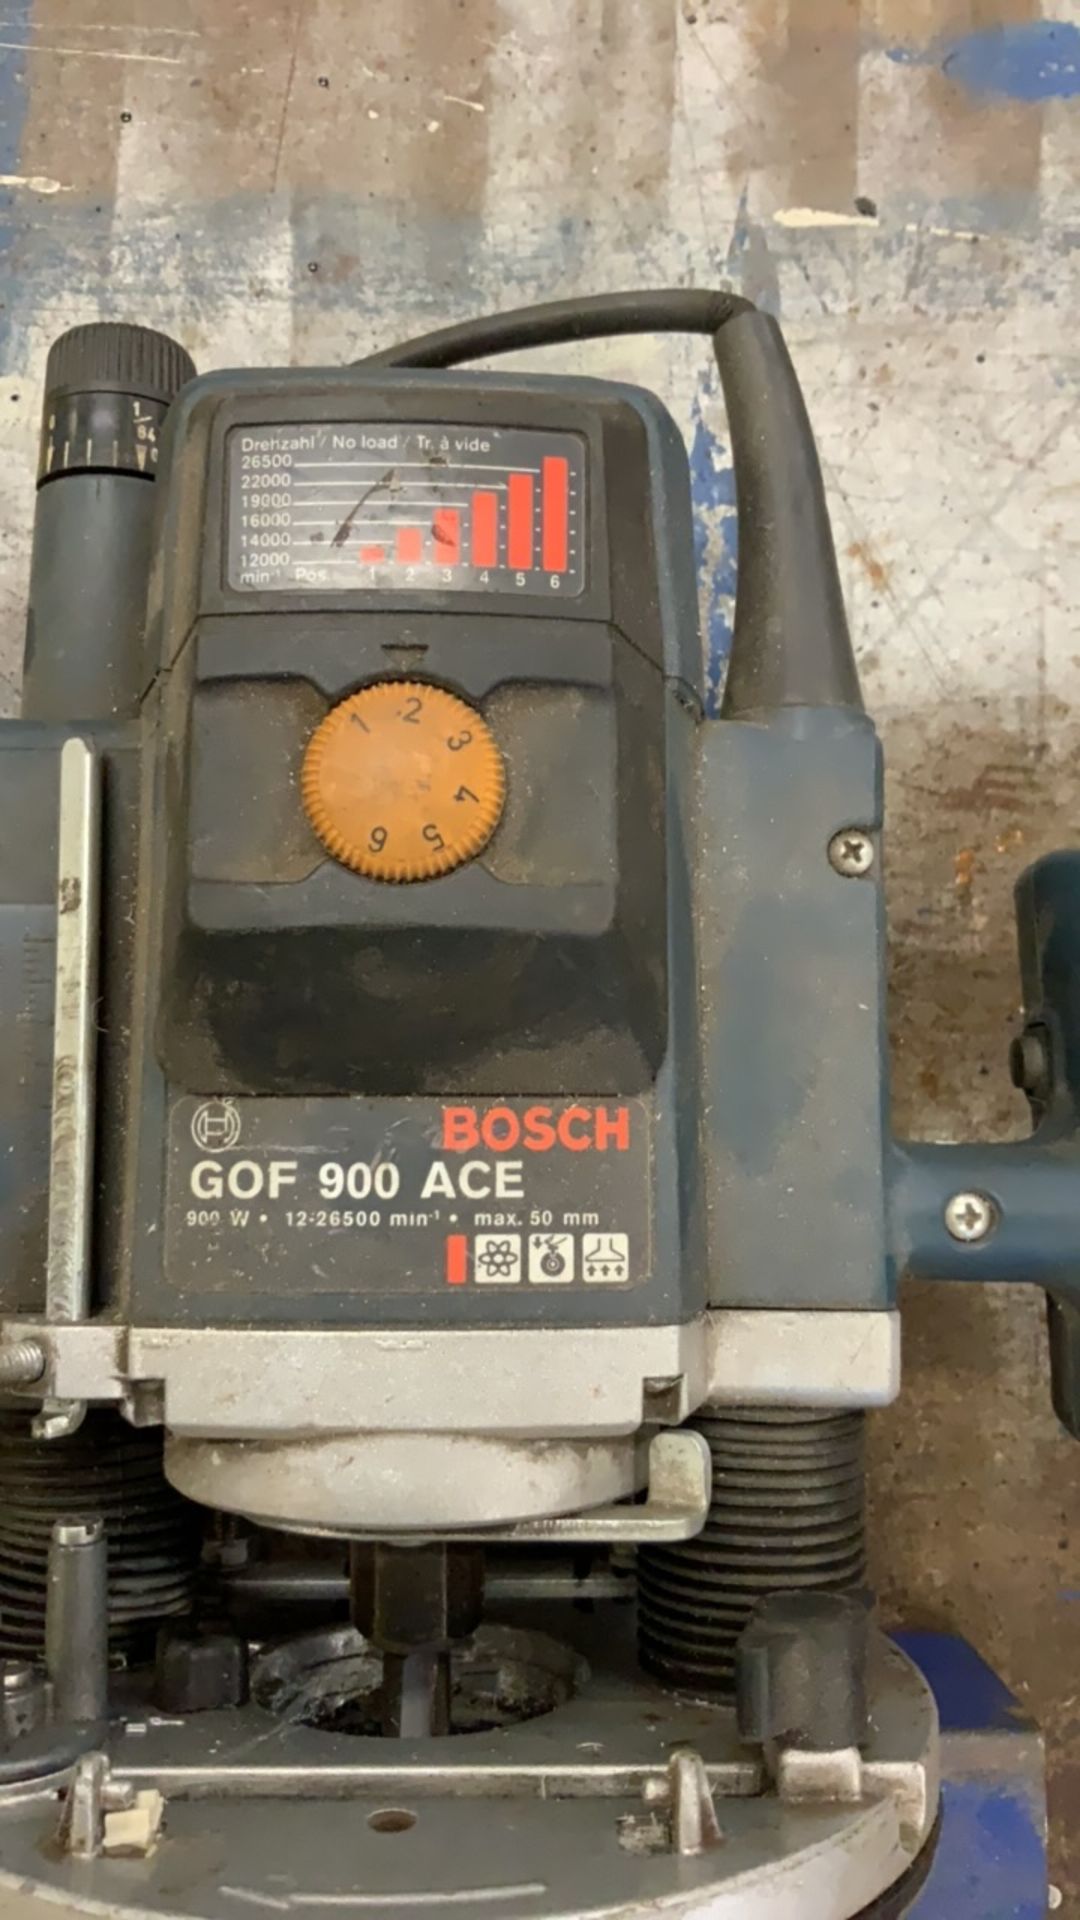 Bosch GOF 900 ACE 110v Router with boxed Router bit set - Image 8 of 10